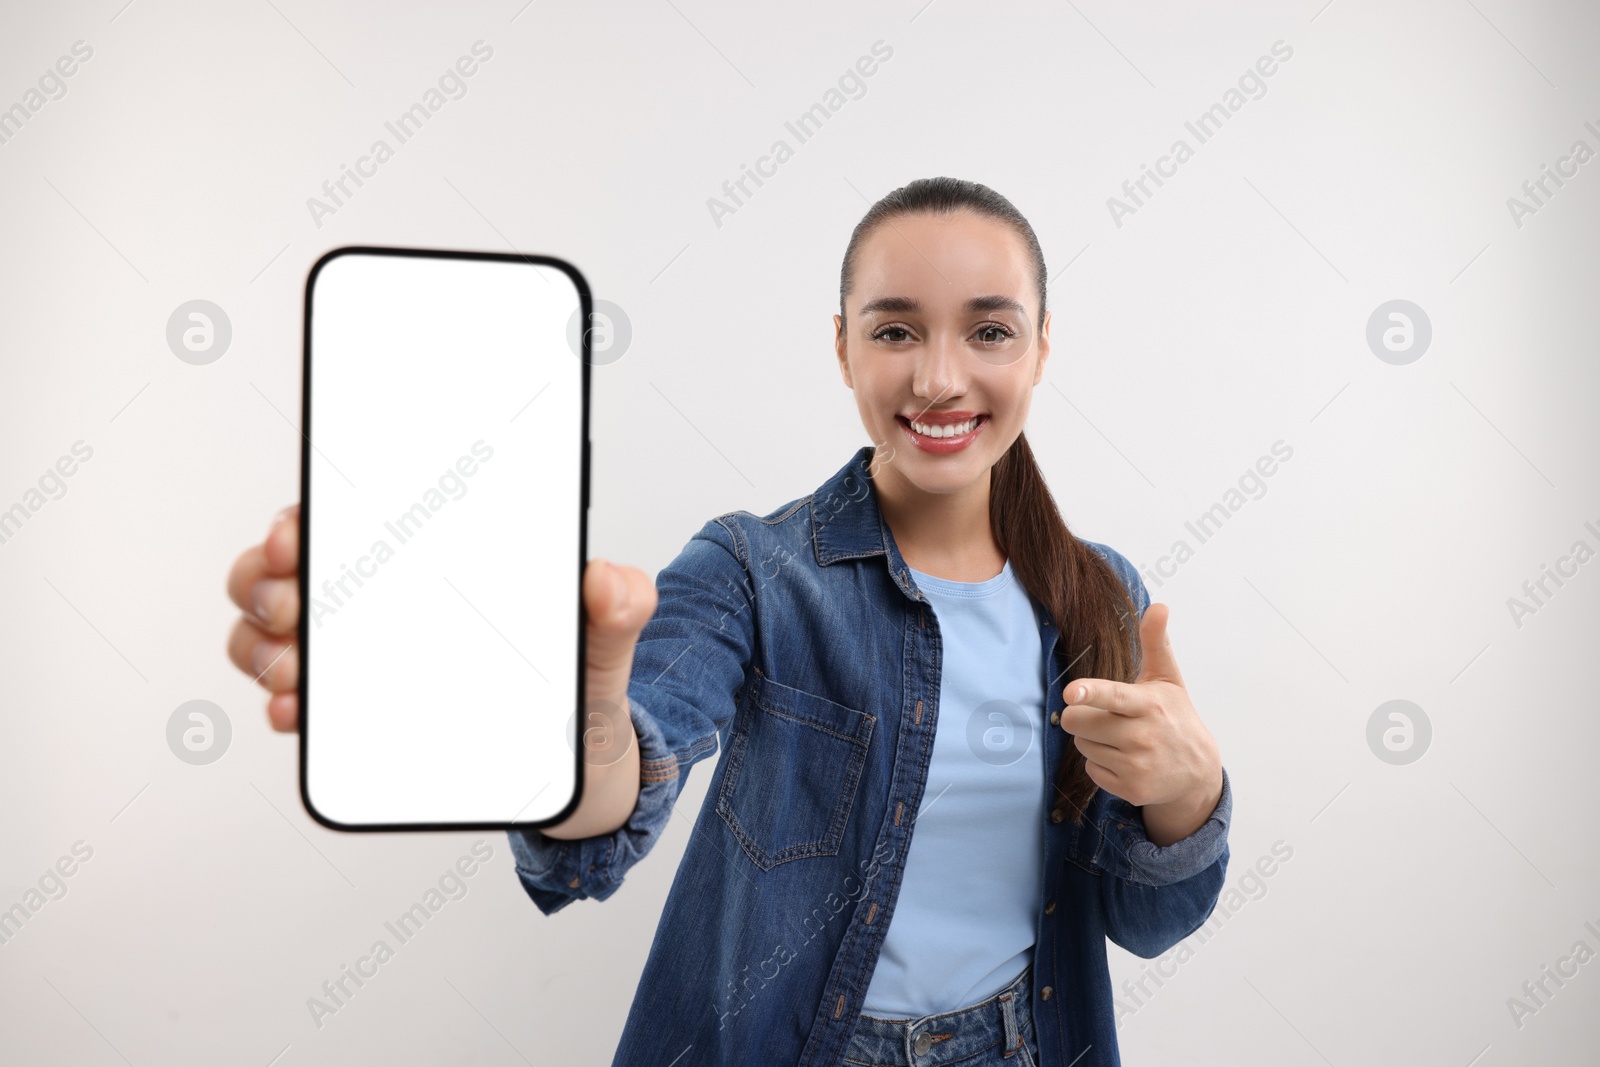 Photo of Young woman showing smartphone in hand and pointing at it on white background